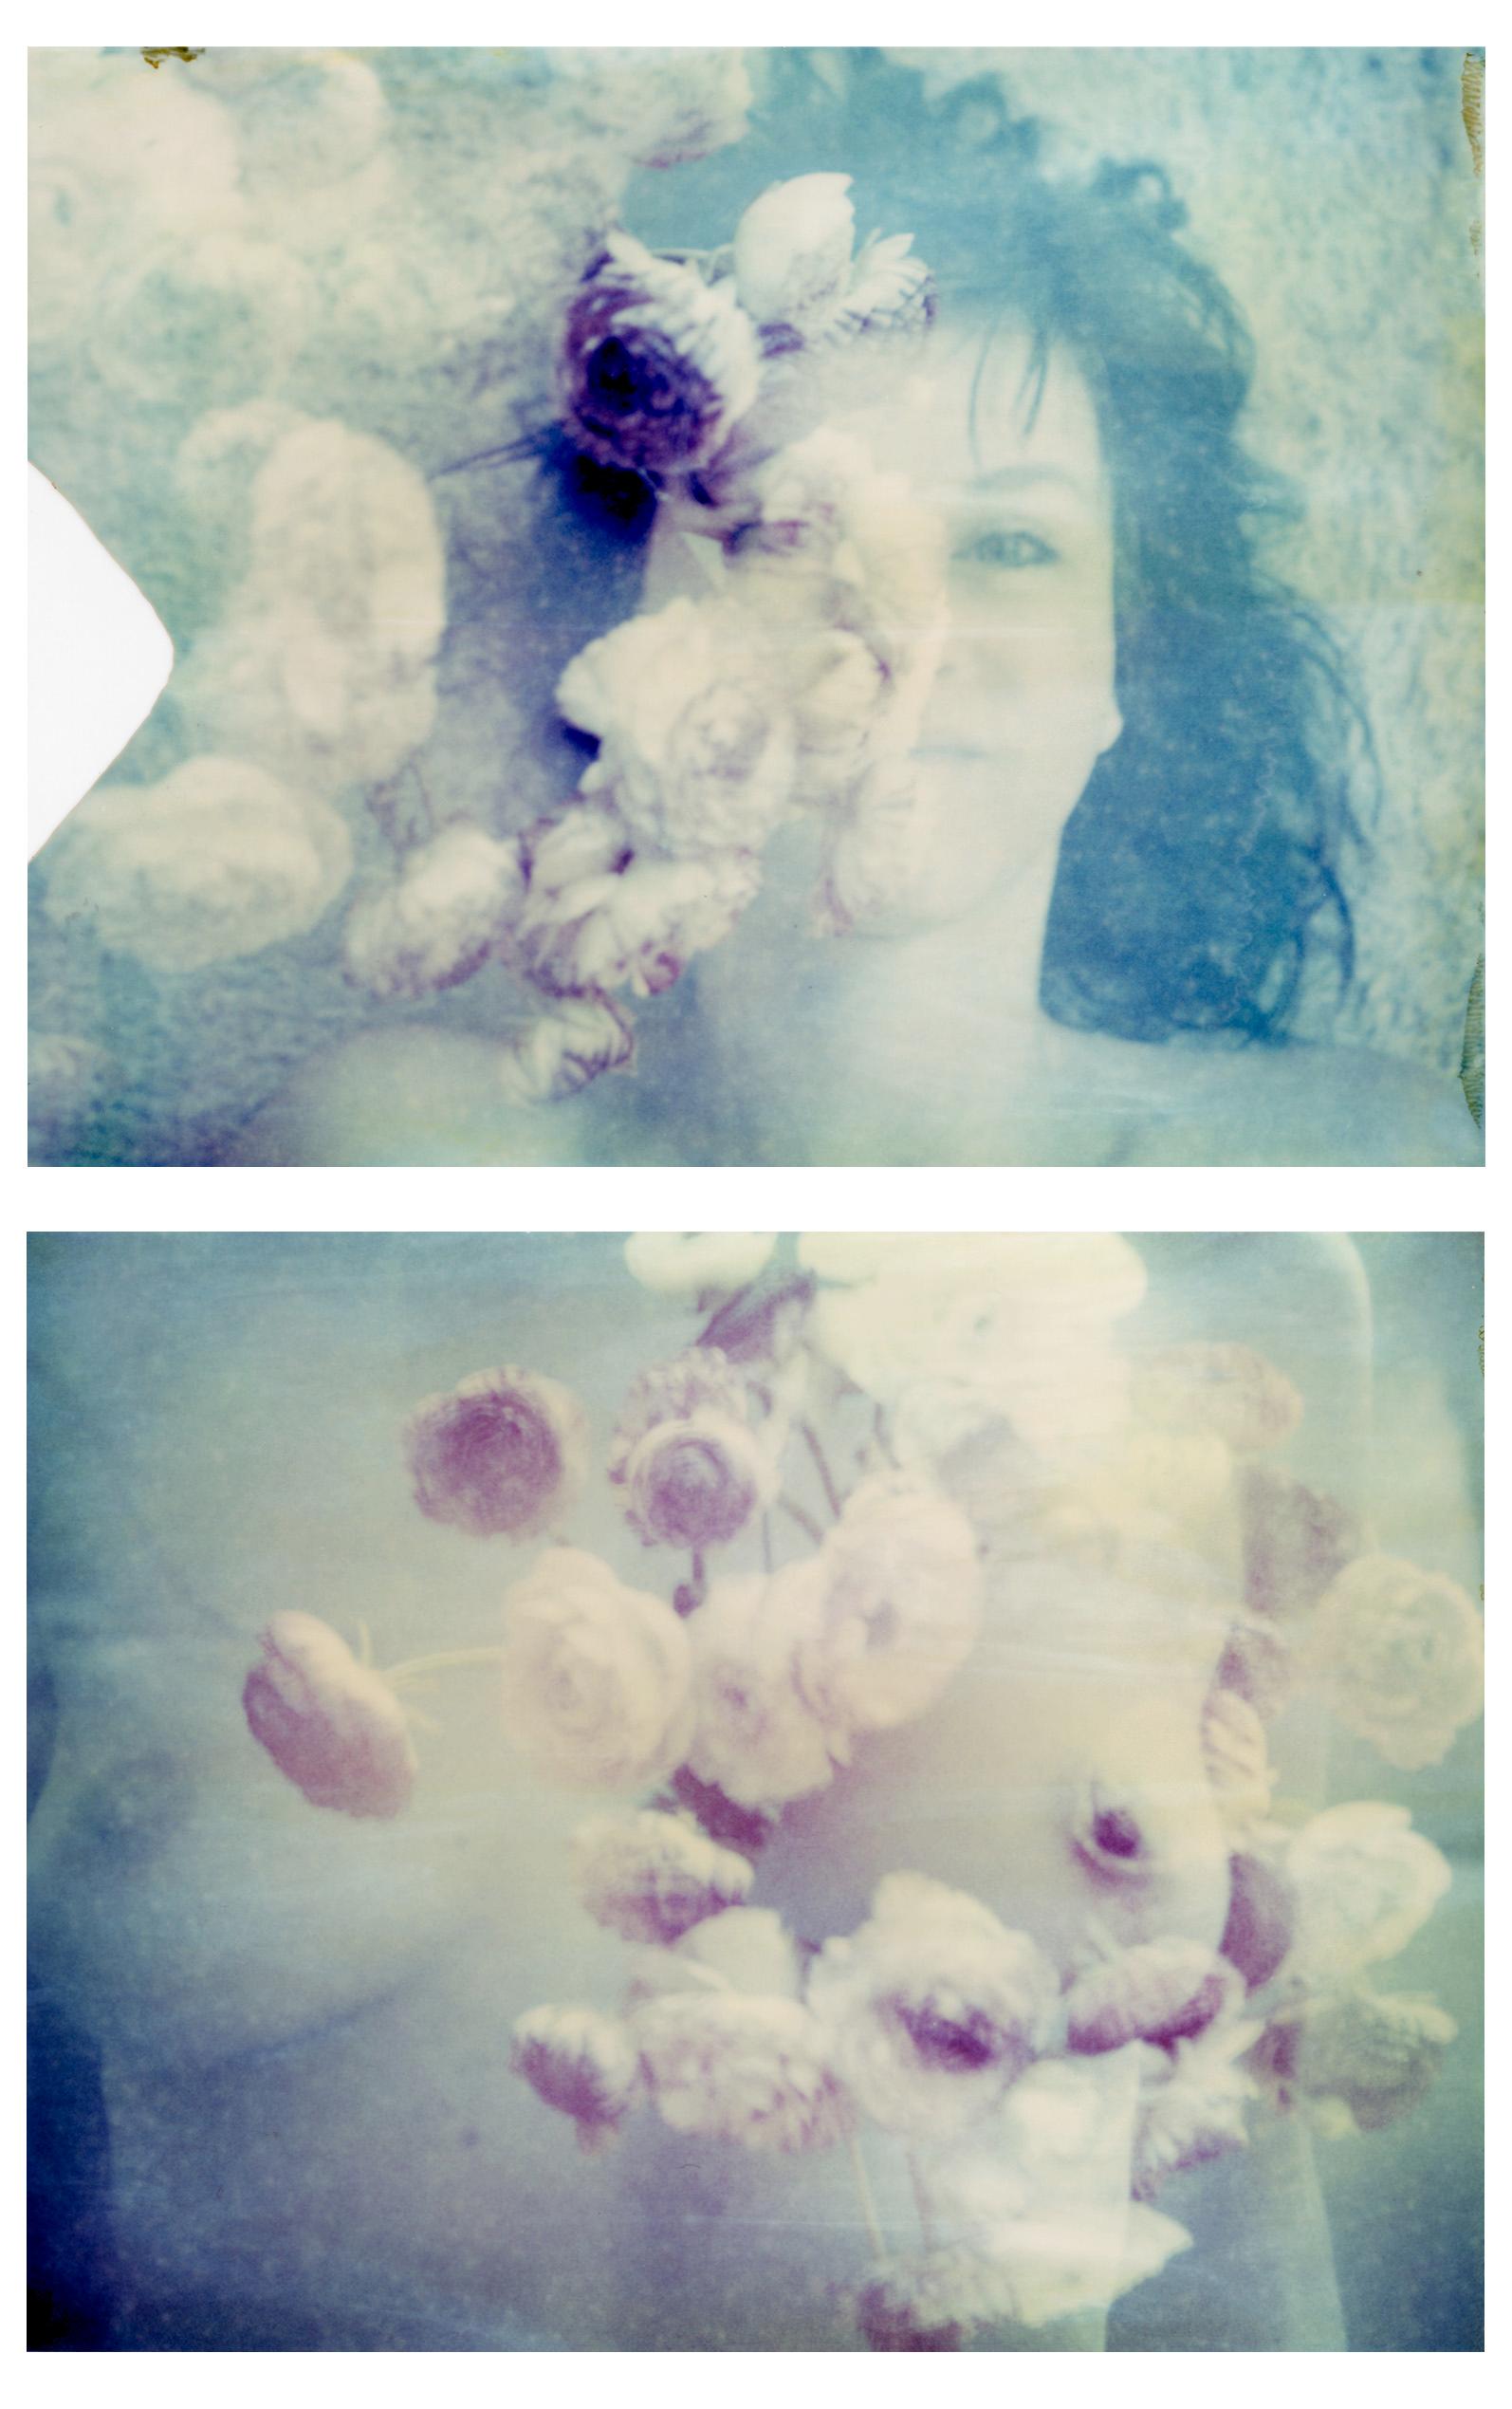 Carmen de Vos Nude Photograph - RANONKEL #diptych [From the series Need to Be] - Polaroid, Nude, Portrait